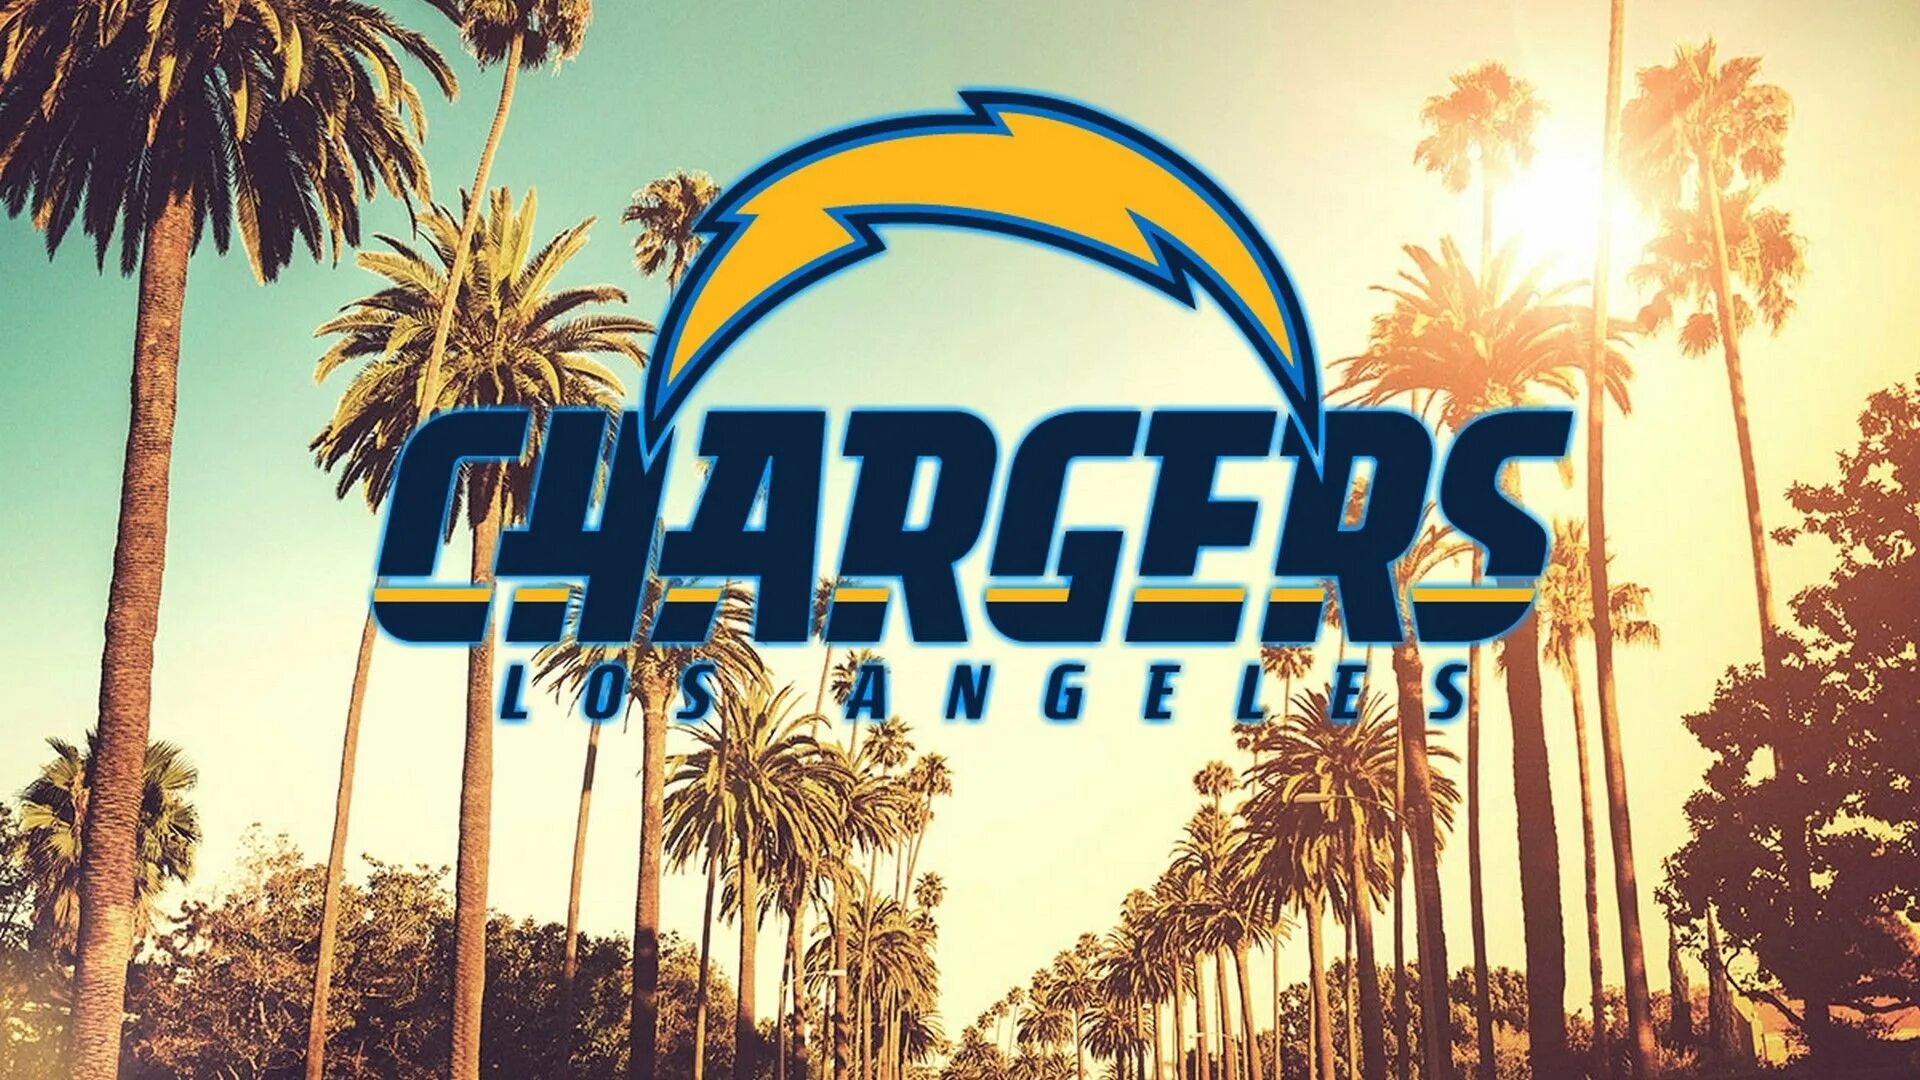 Los angeles 52 текст. La Chargers. Los Angeles. Марки Лос Анджелес. Los Angeles Chargers logo.